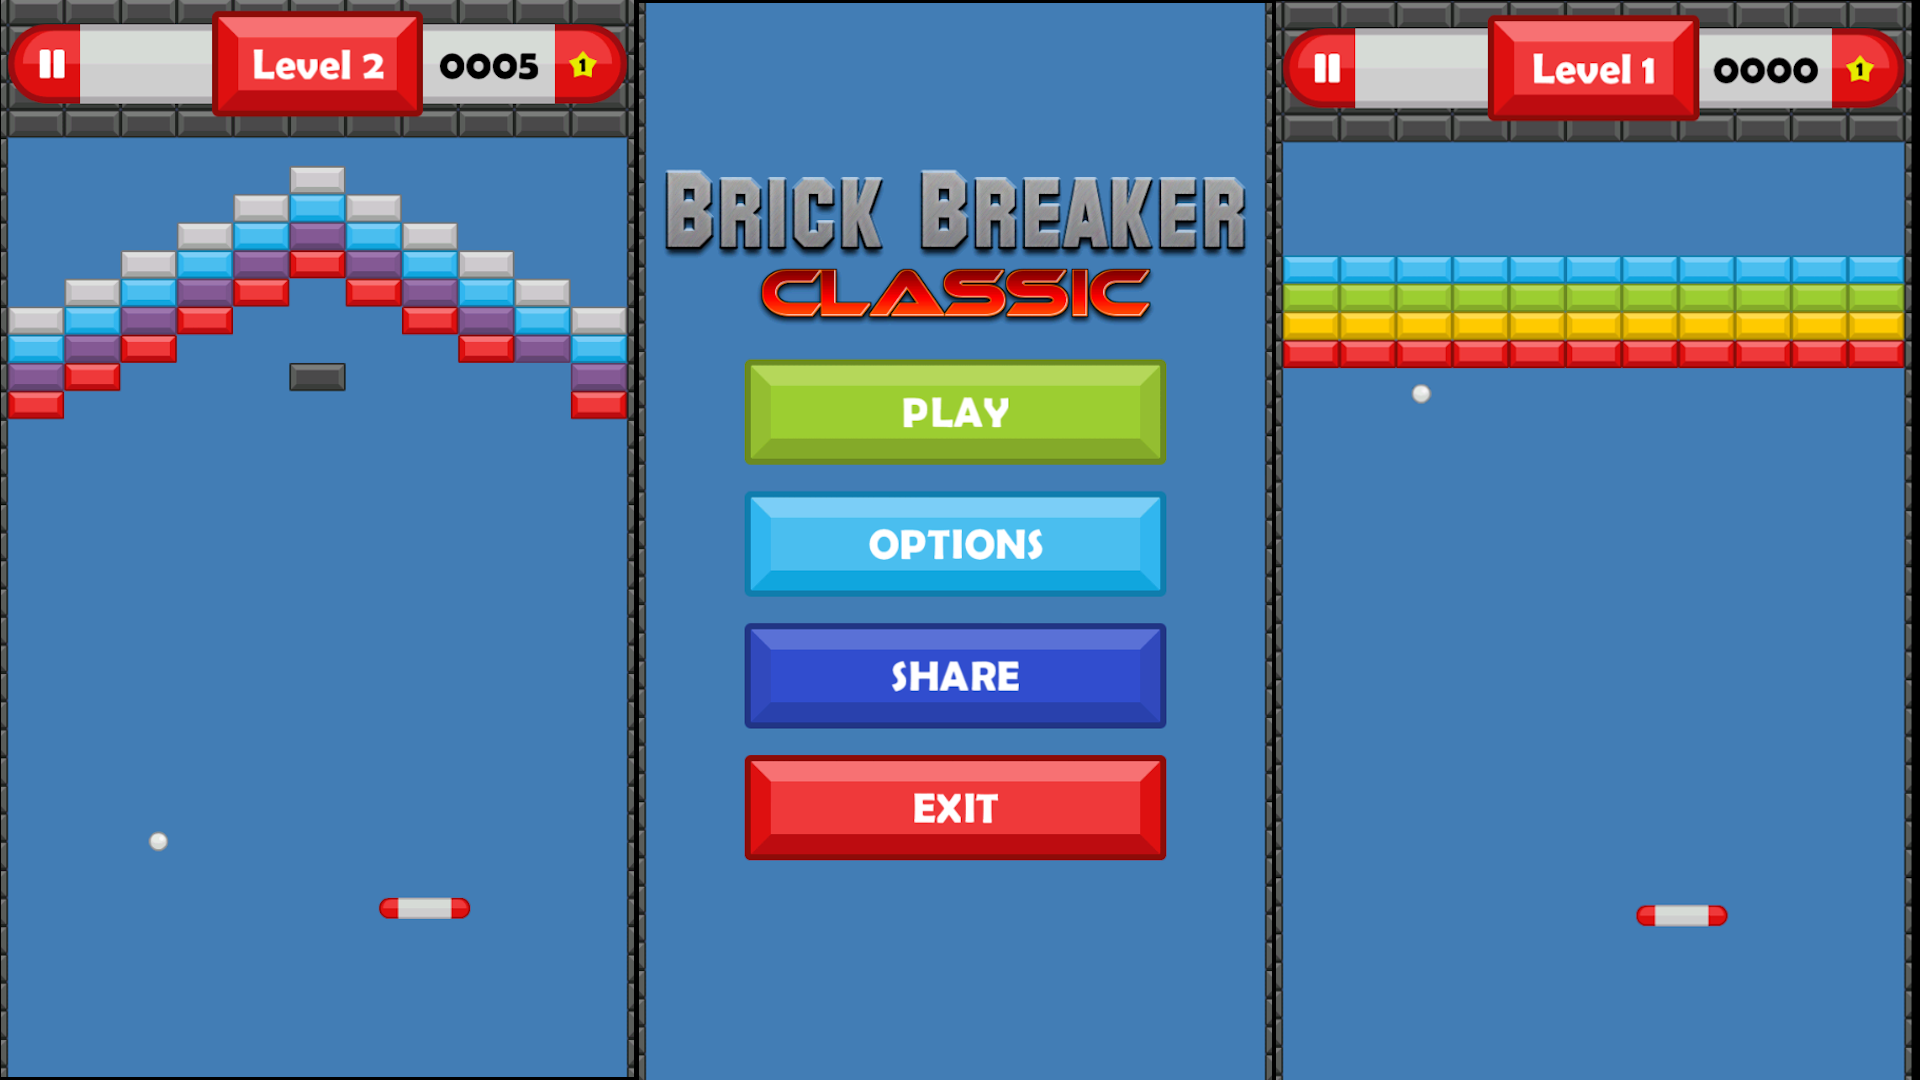 Classic_brick_breaker_game2 – List of android games